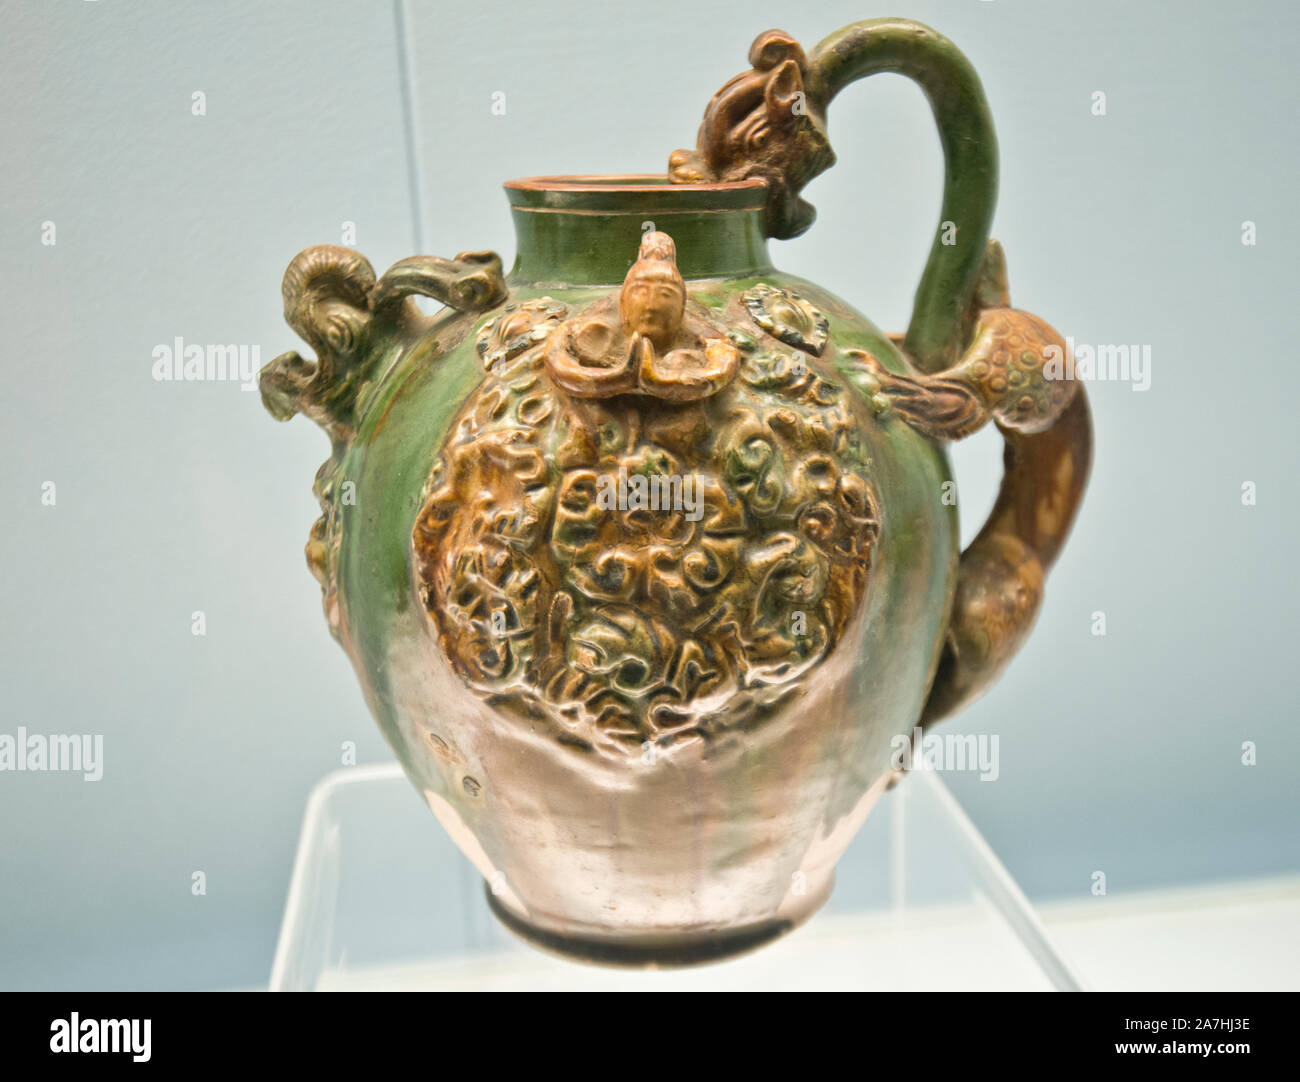 Chinese porcelain: Polychrome glazed pottery pitcher with dragon head and applied design. Tang Dynasty (618-907 A.D.). Shanghai Museum, China. Stock Photo